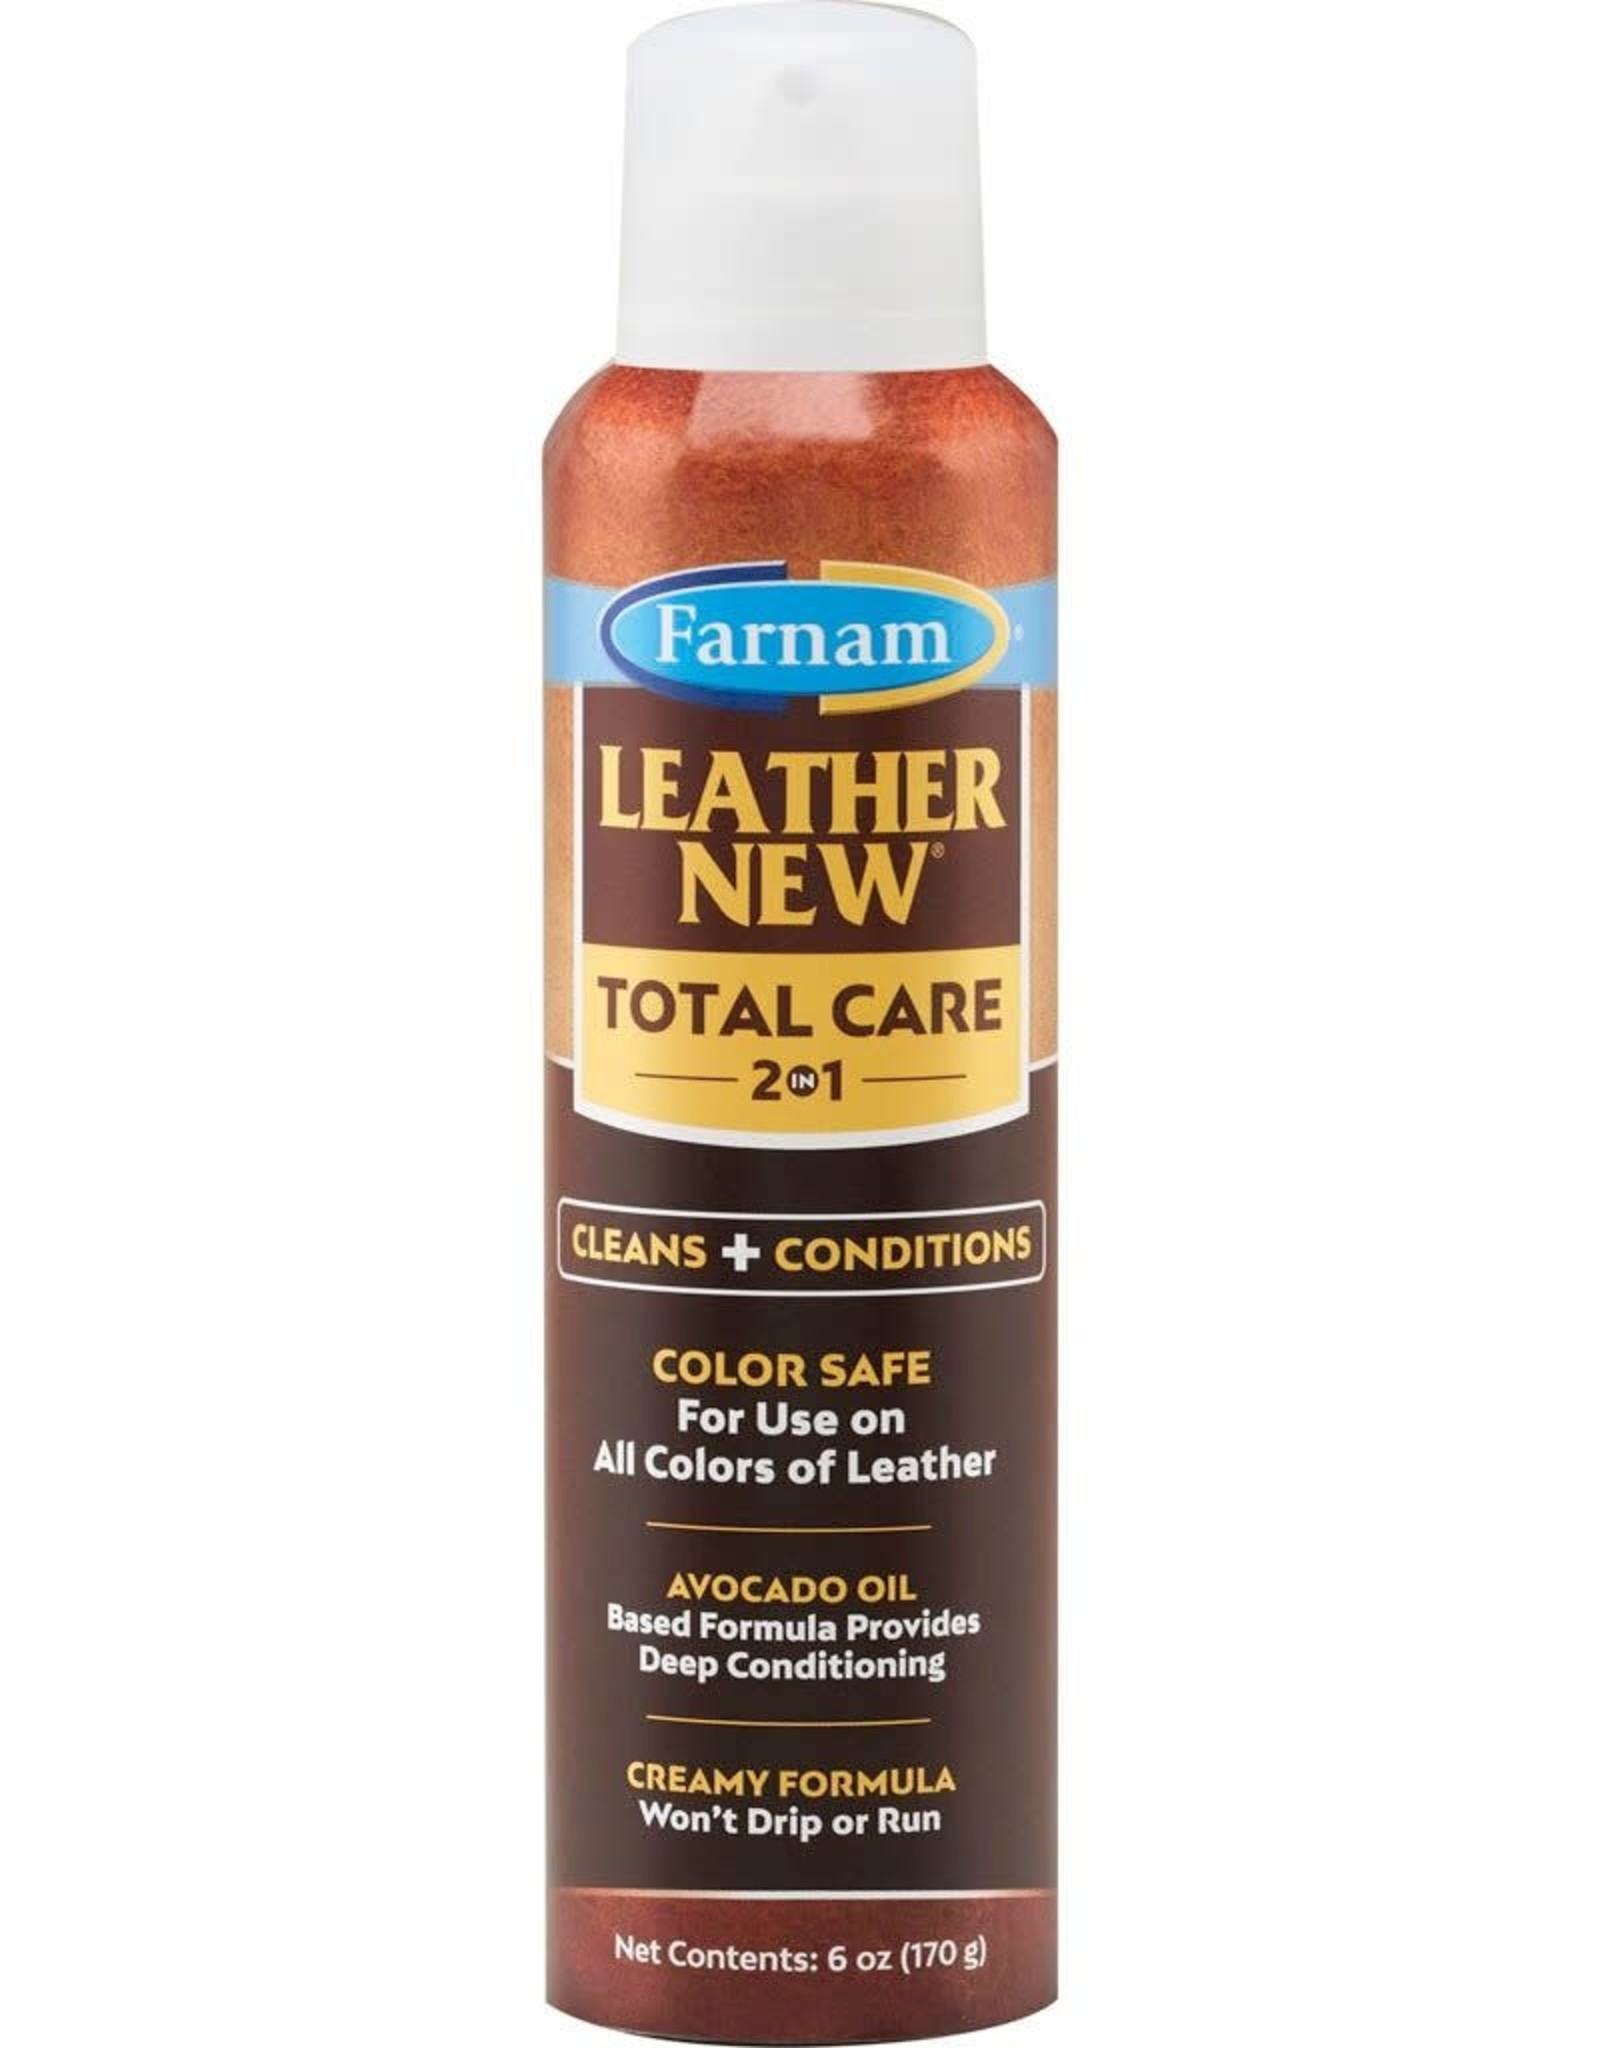 Farnam Leather New Total Care 2in1